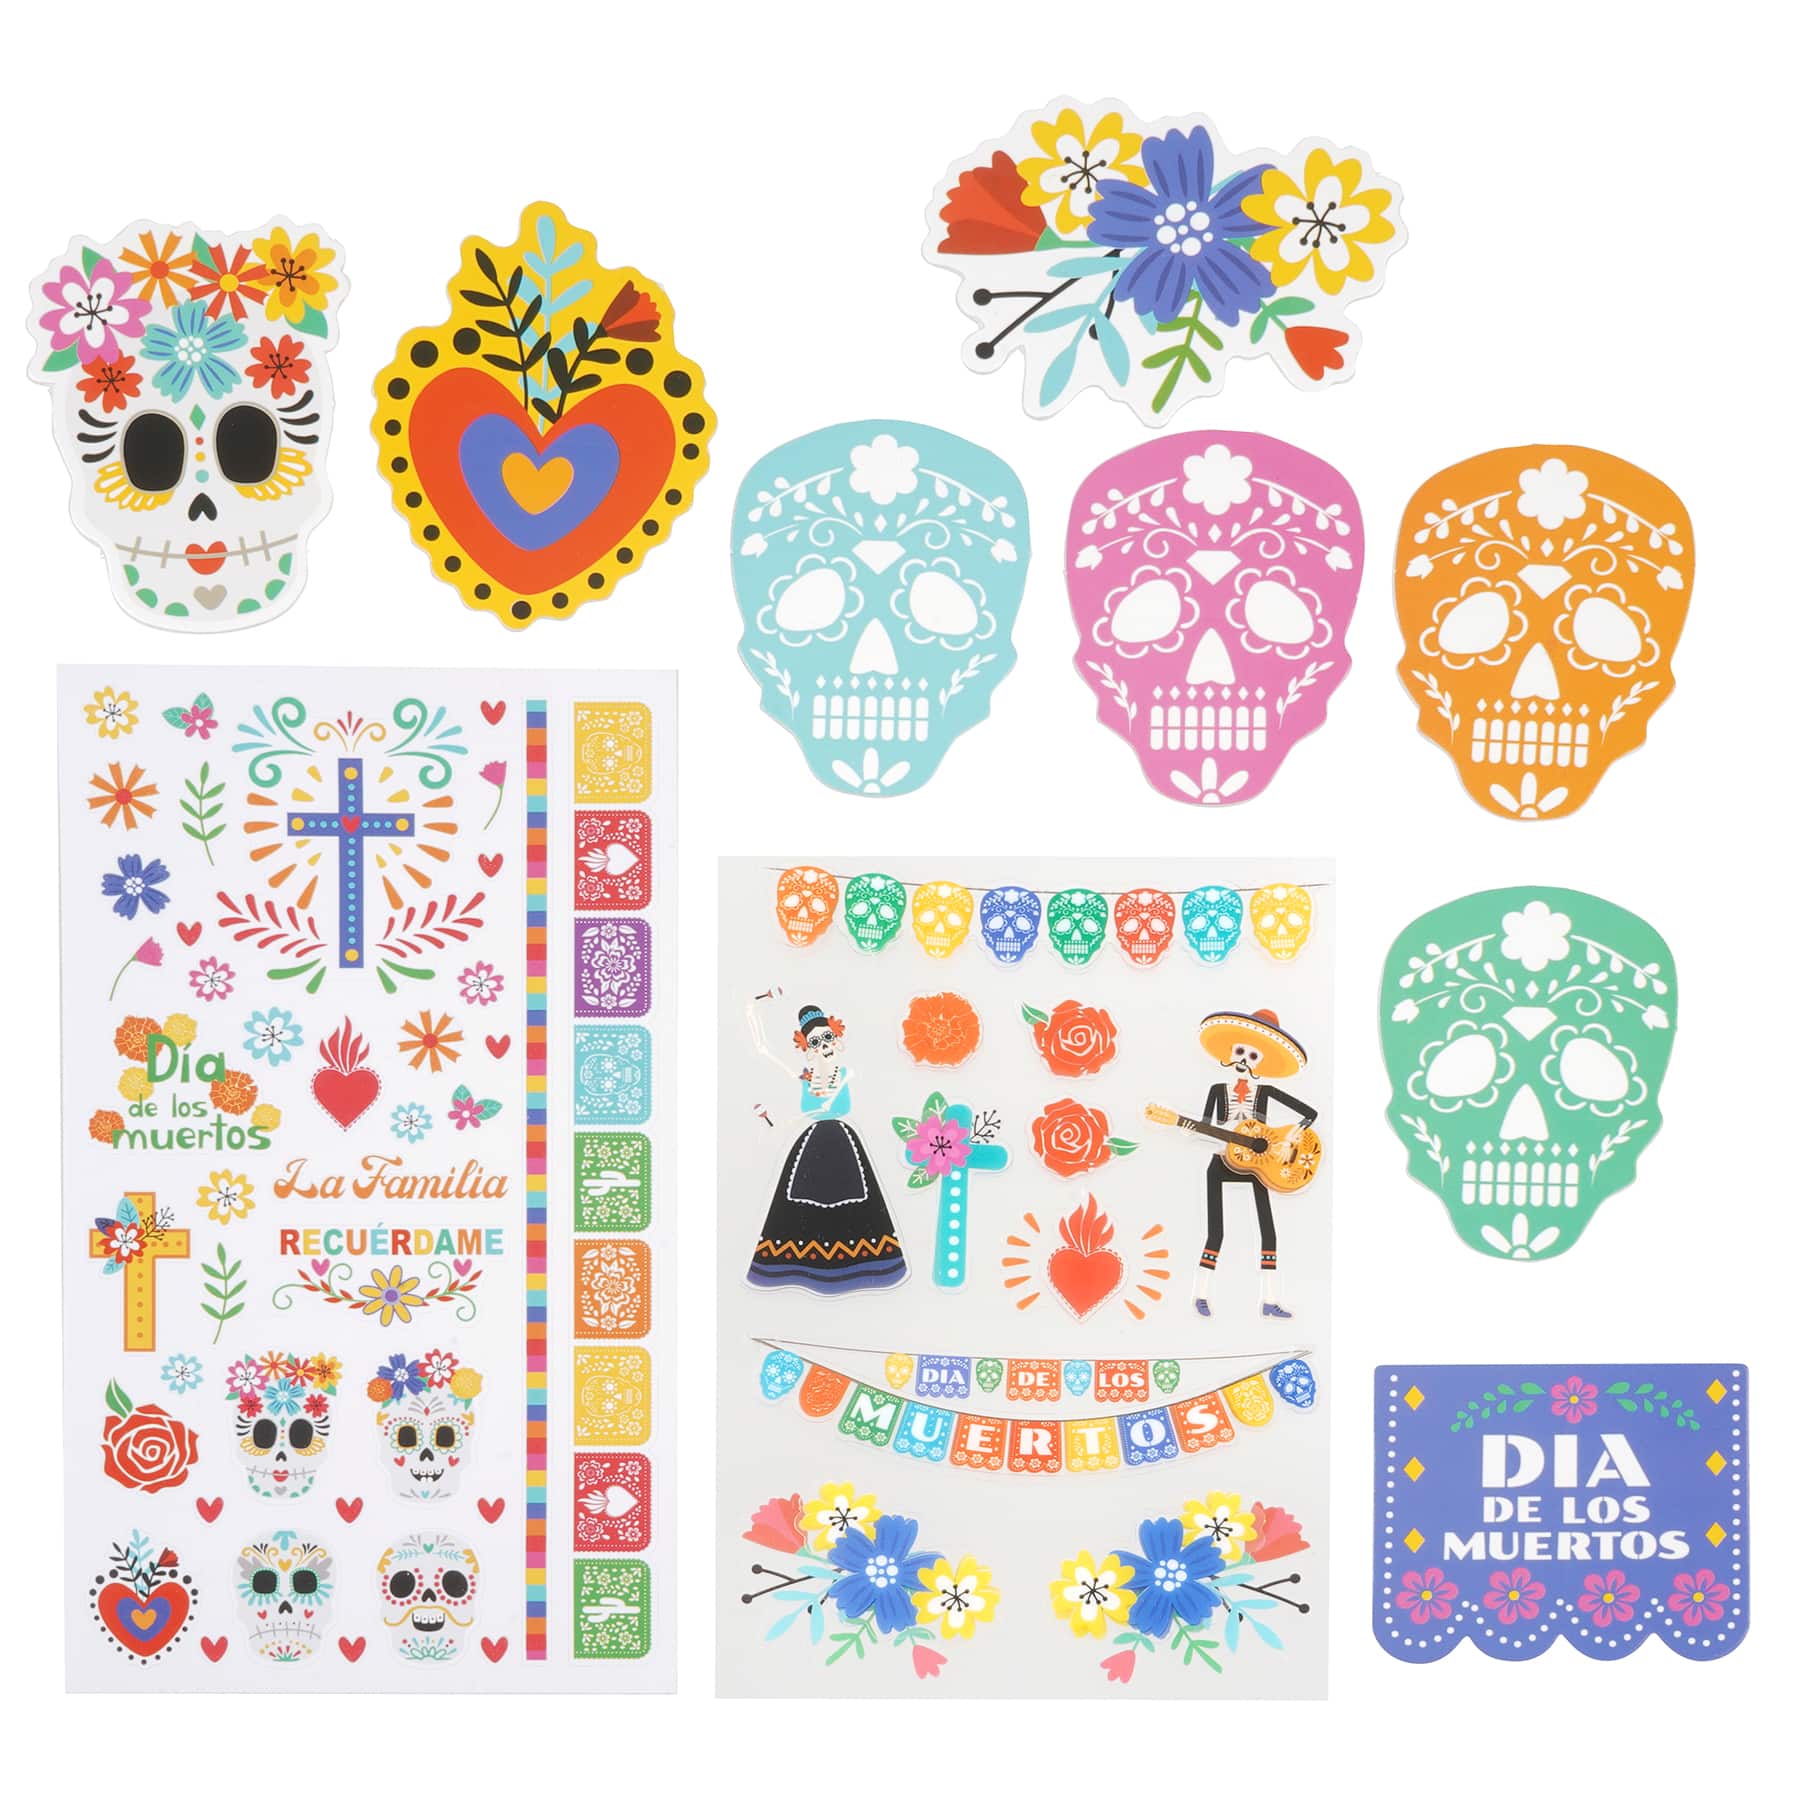 Day of the Dead Holiday Stickers by Recollections&#x2122;